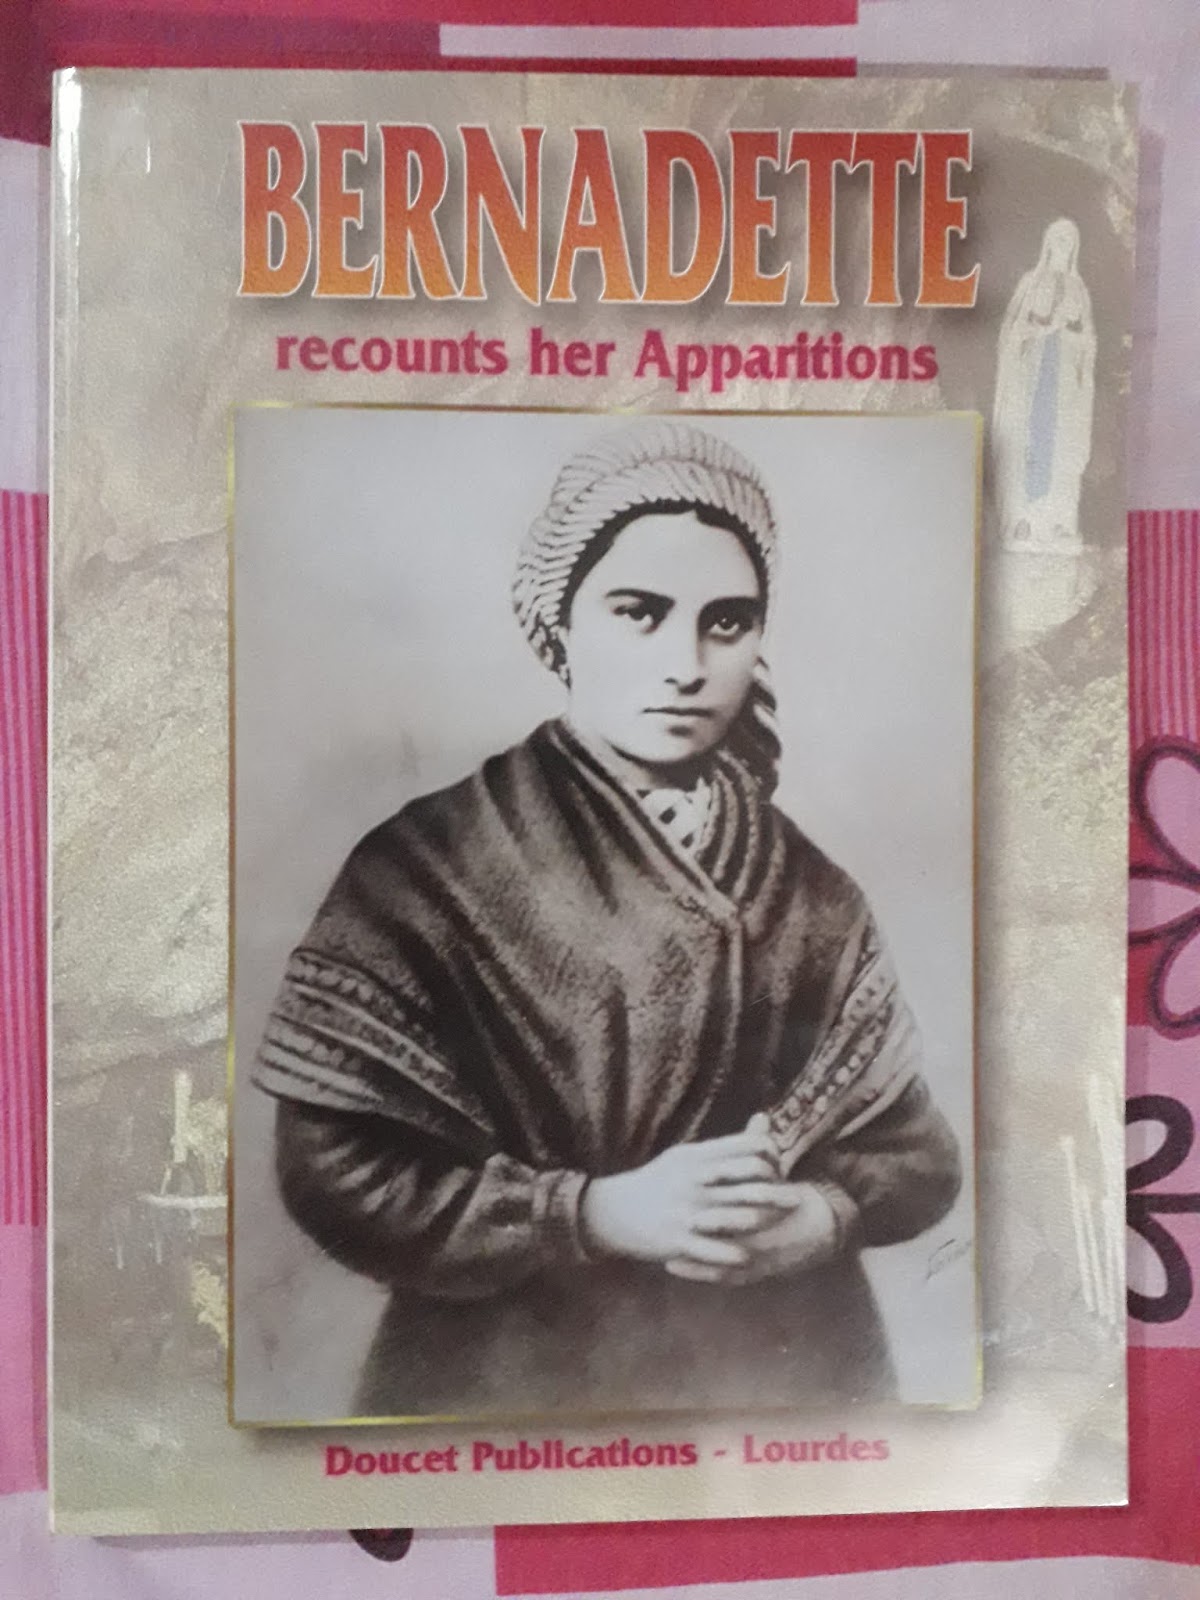 The Meaning and Purpose of Life: Bartrès and Bernadette